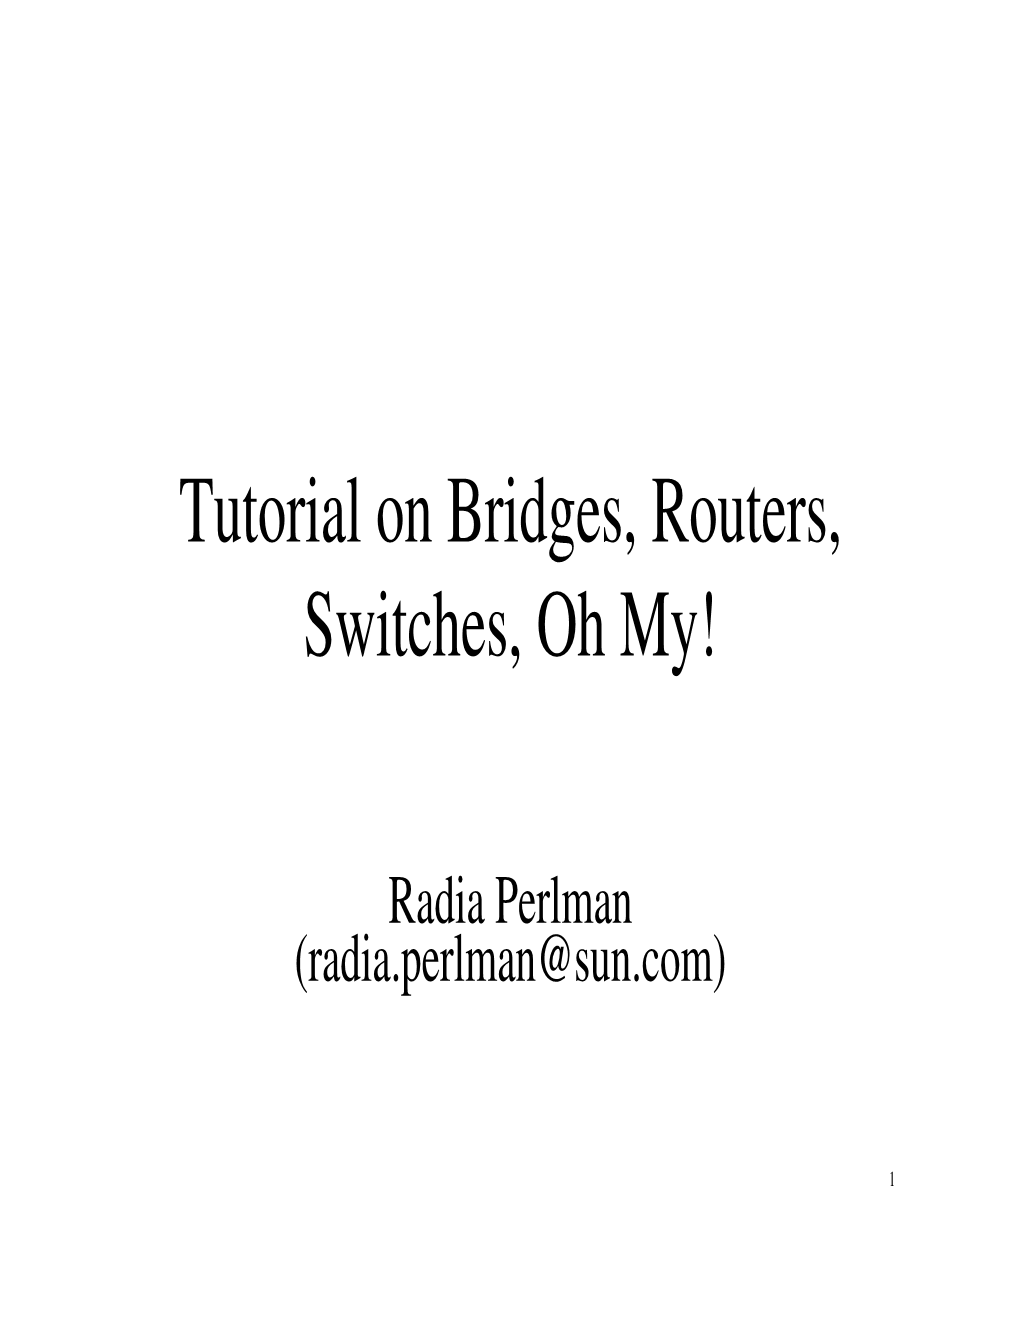 Tutorial on Bridges, Routers, Switches, Oh My!